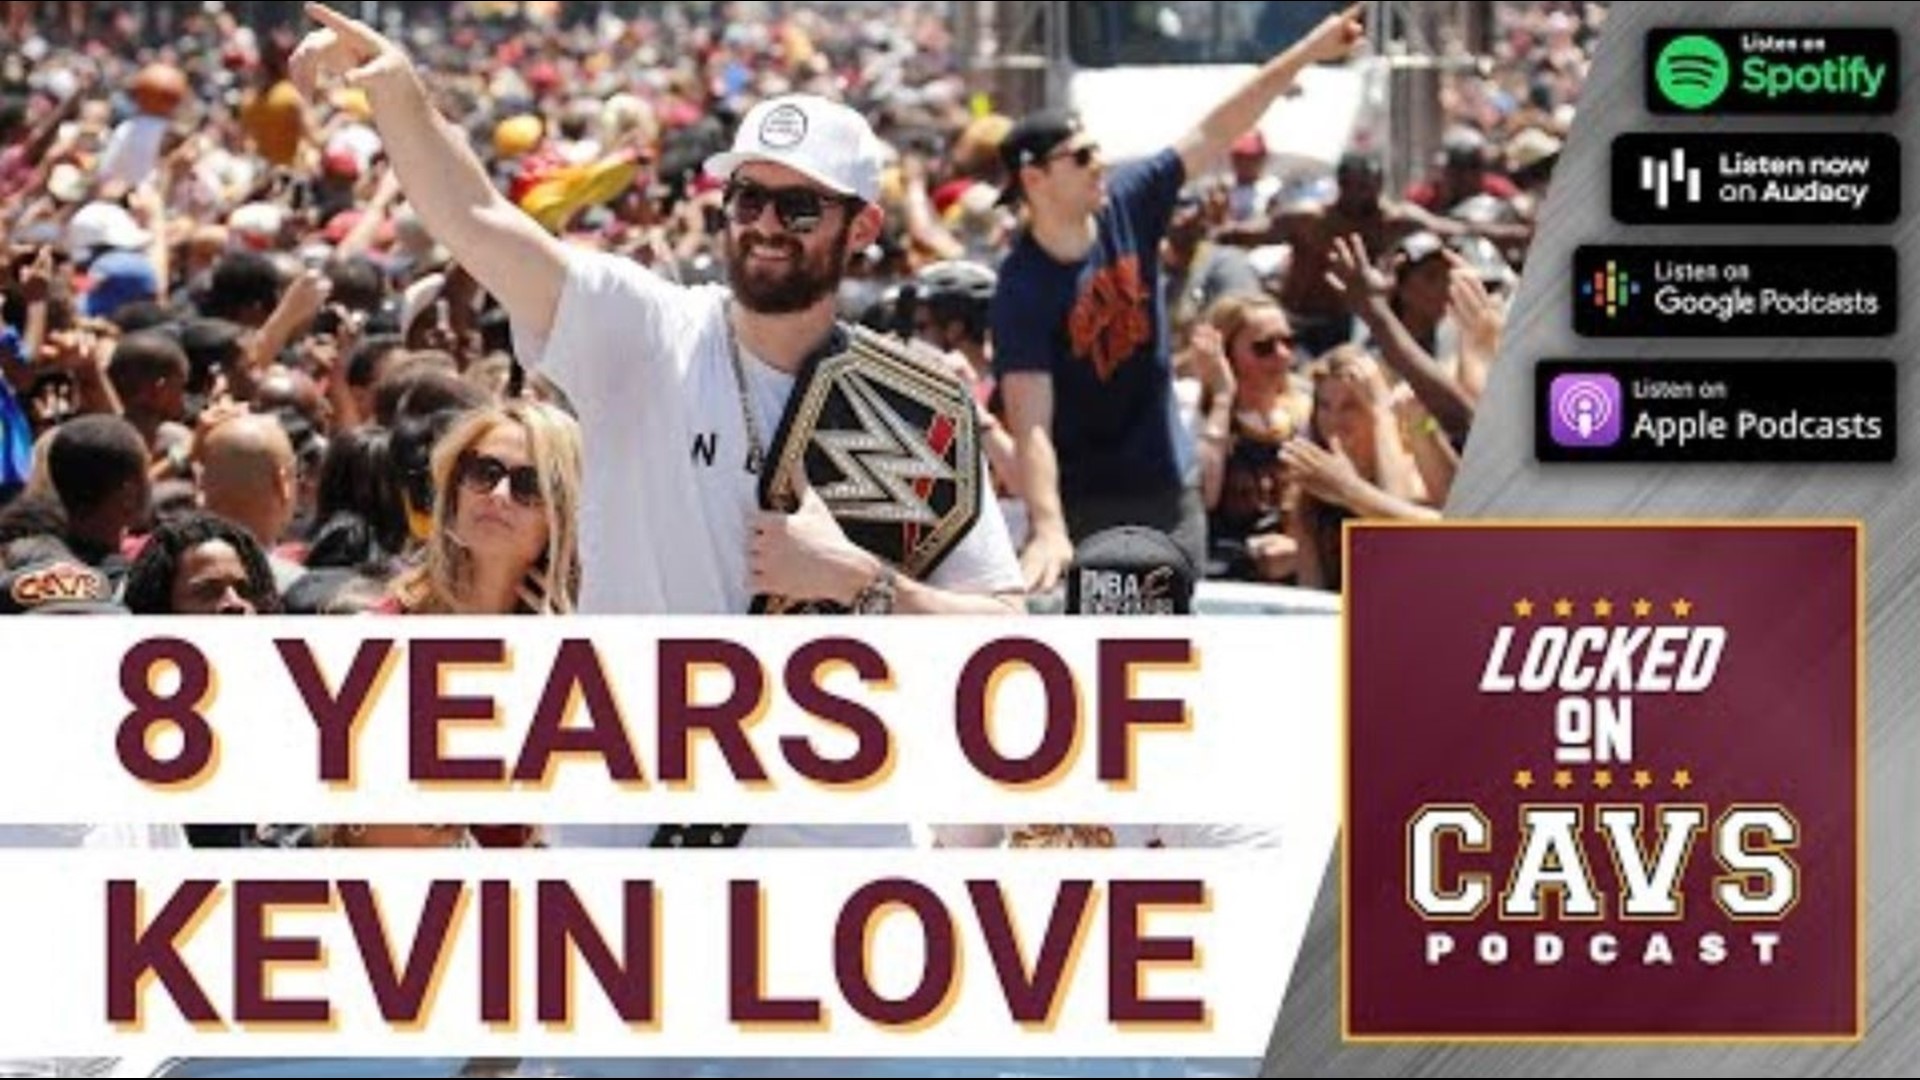 Chris Manning goes solo to talk about Kevin Love’s eight year tenure with the Cavs.